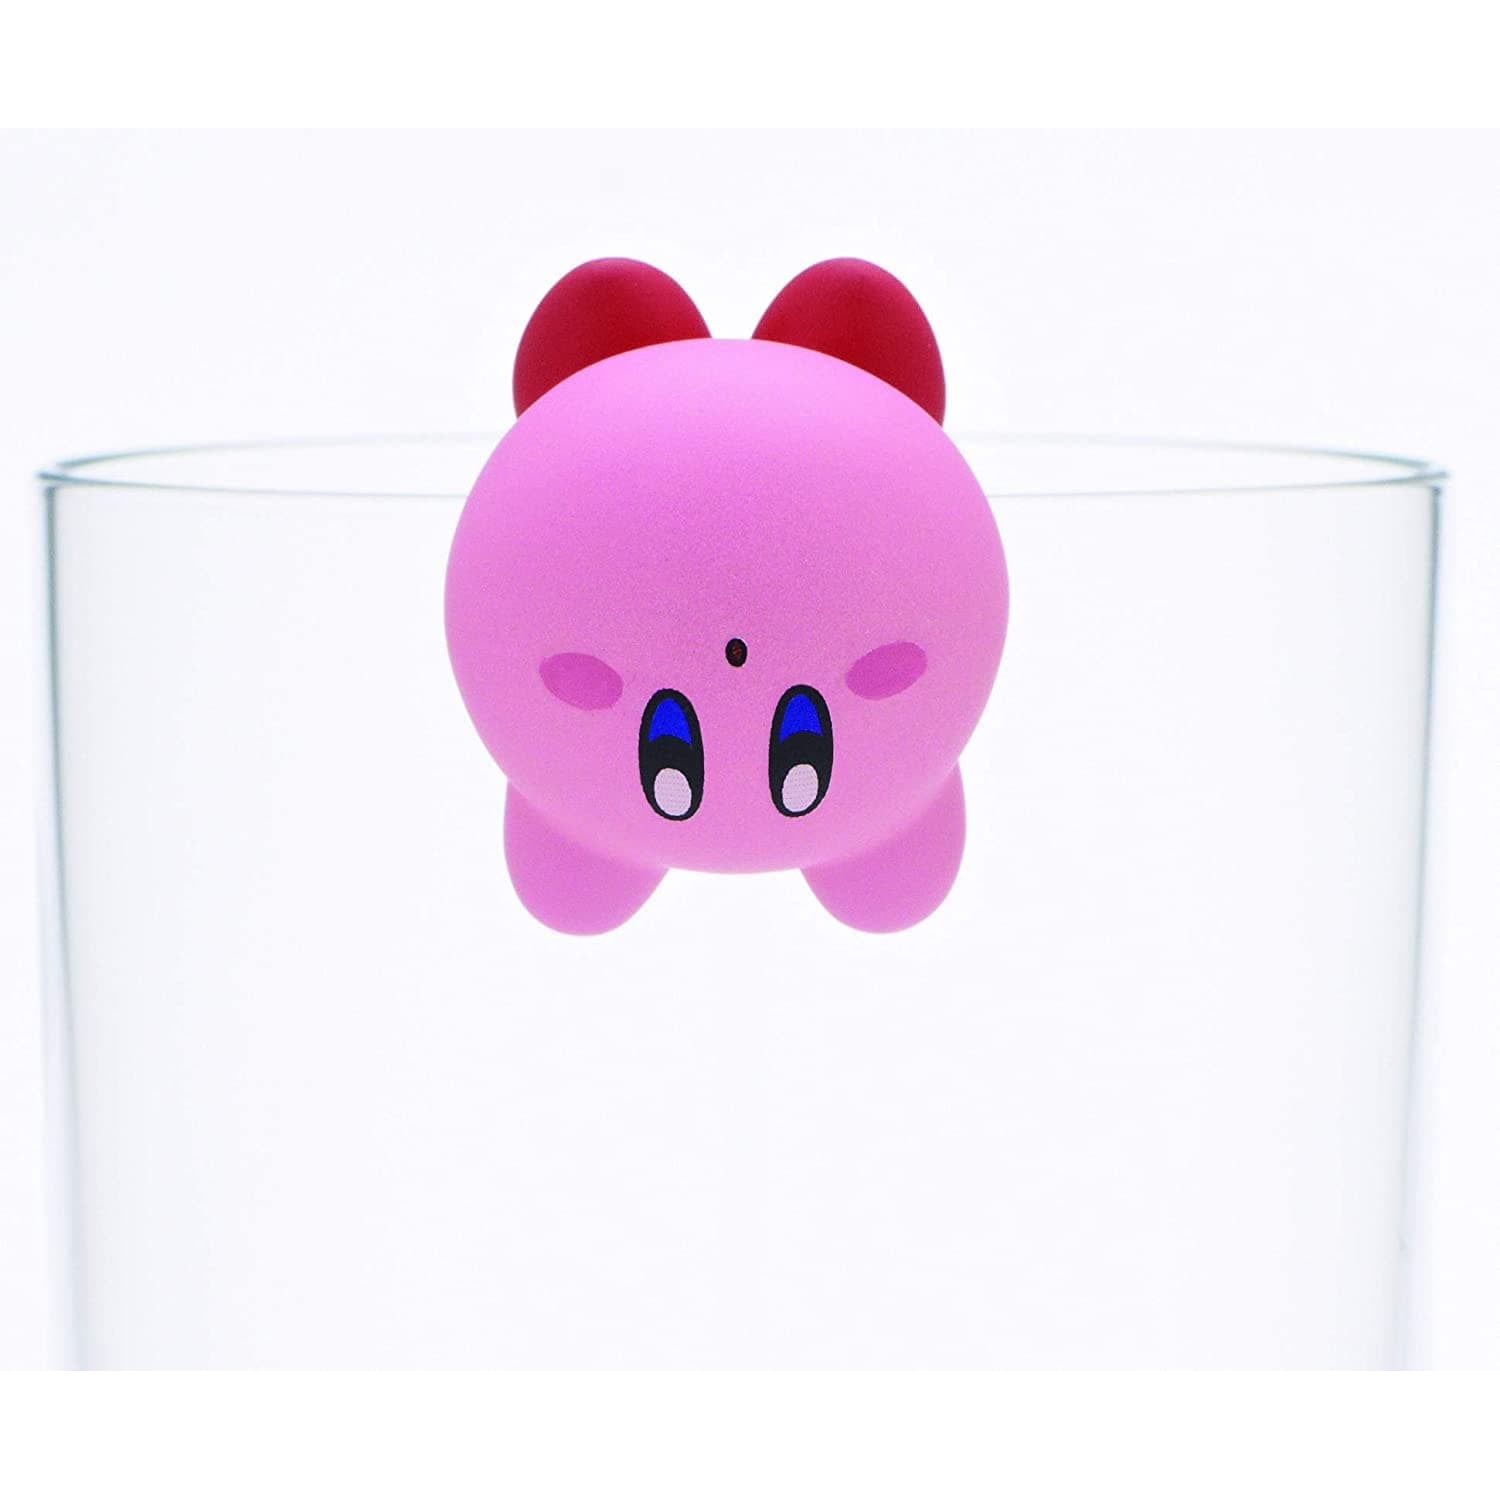 Clever Idiots-Kitan Club - Putitto Kirby Blind Box Vol.2 - Assorted Styles-KC-044-Legacy Toys